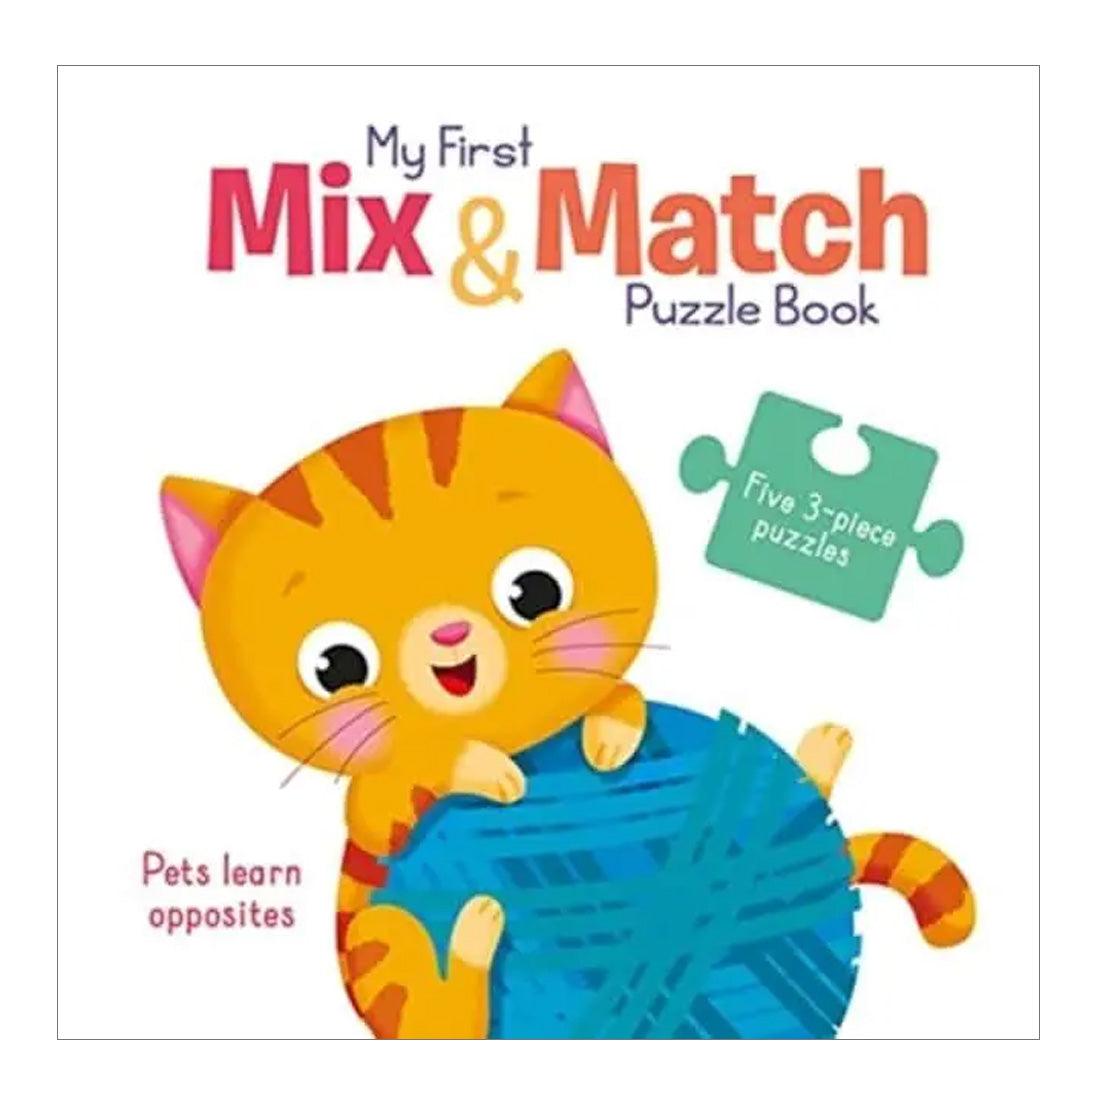 Mix & Match Puzzle Book: Pets Learn Opposites